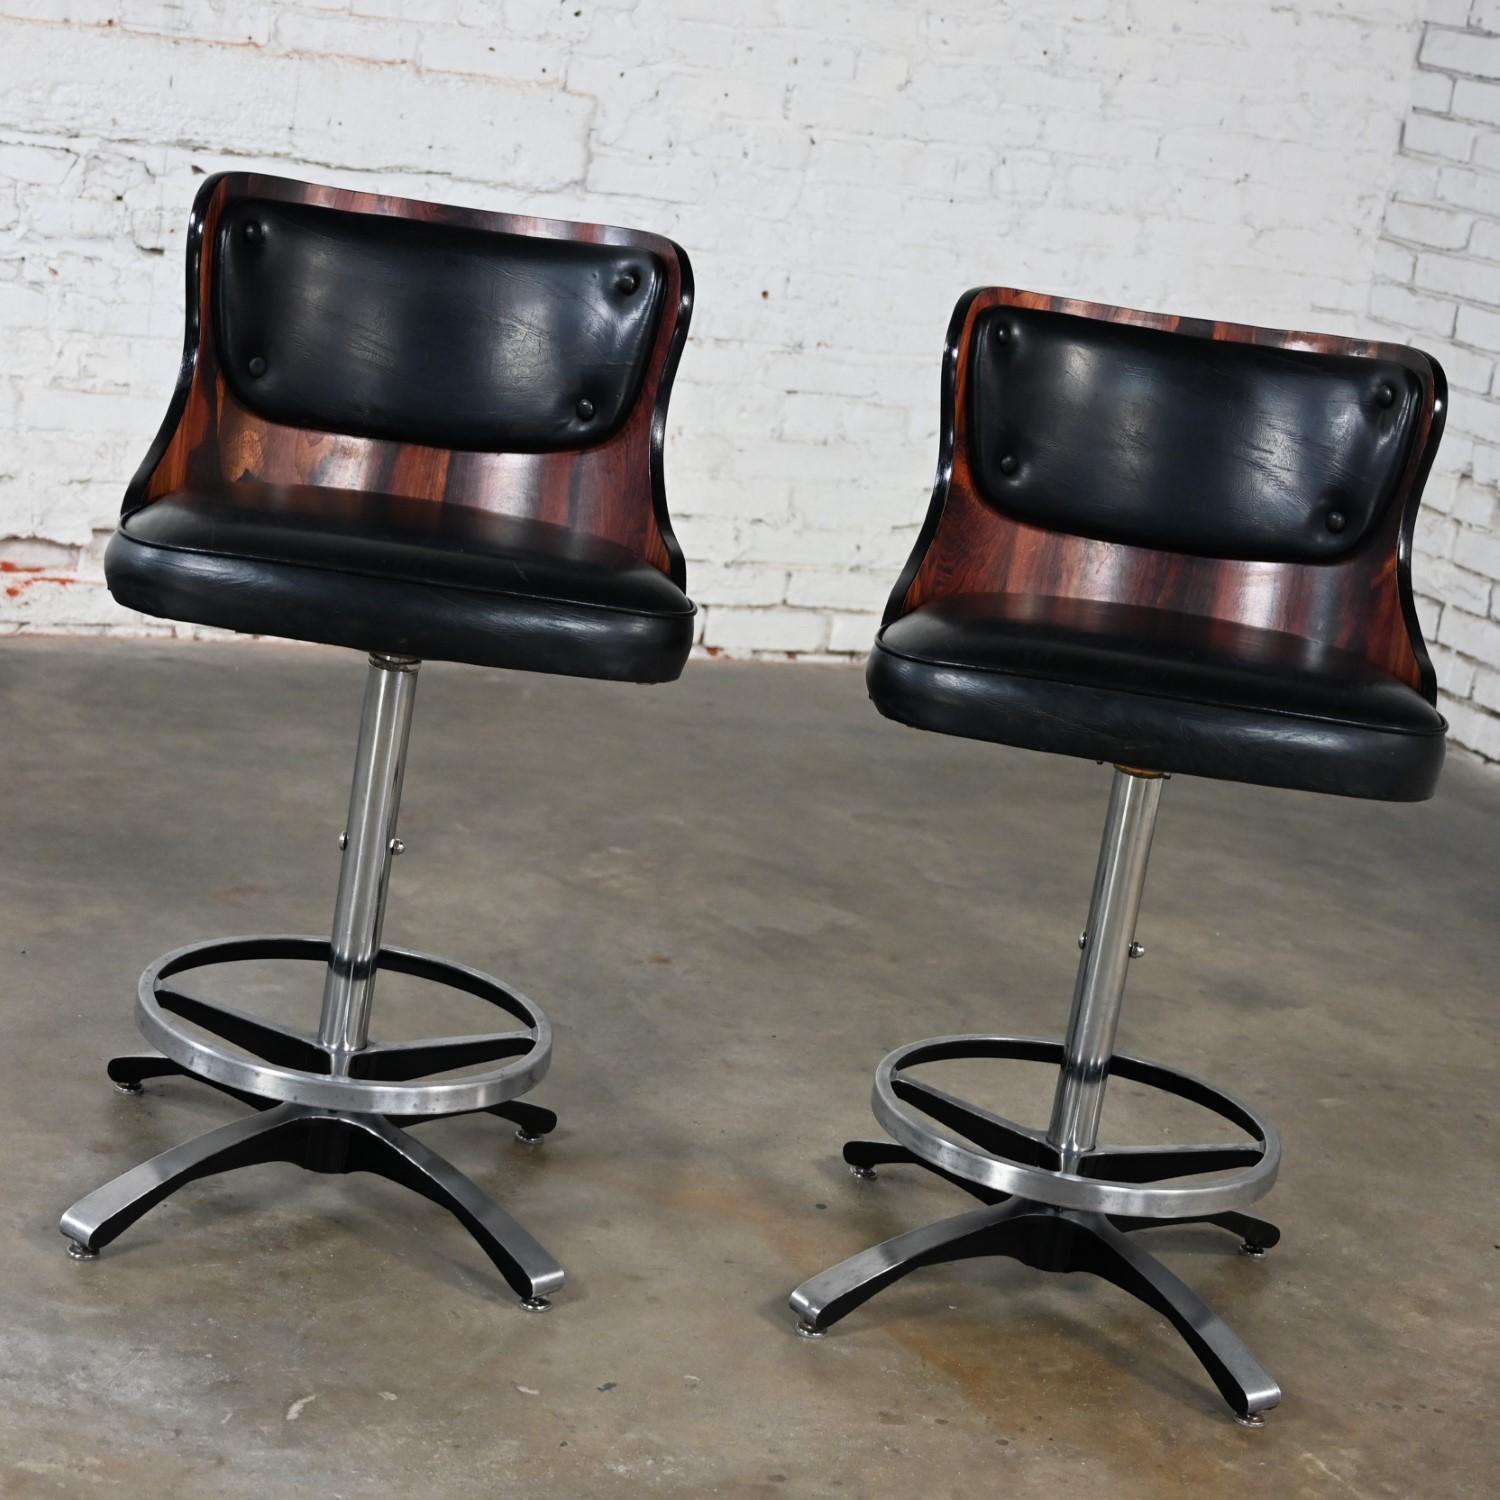 Handsome vintage Mid Century Modern adjustable and swivel barstools comprised of the original black vinyl or faux leather, molded, curved faux rosewood laminate backs, chrome shaft, and cast aluminum four prong base & footrest. Beautiful condition,